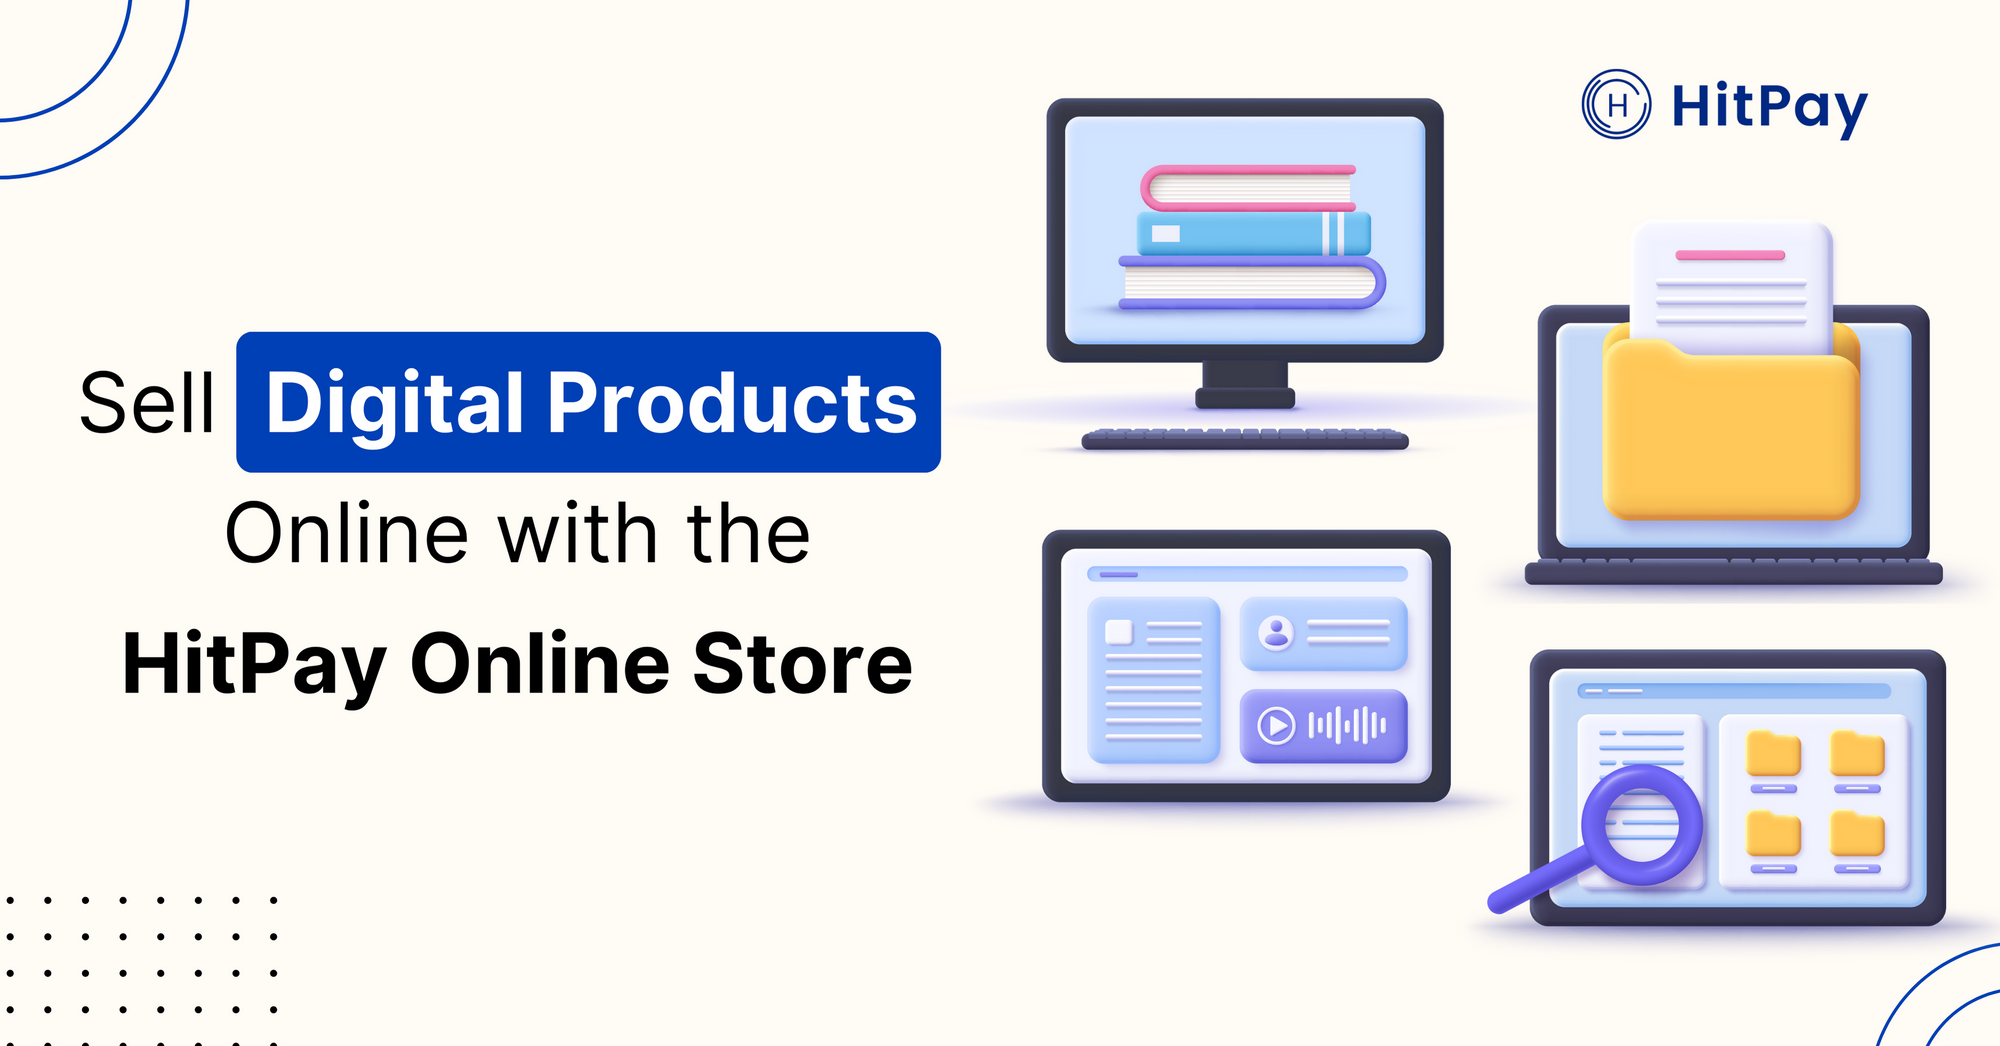 Sell Digital Products Online with the HitPay Online Store